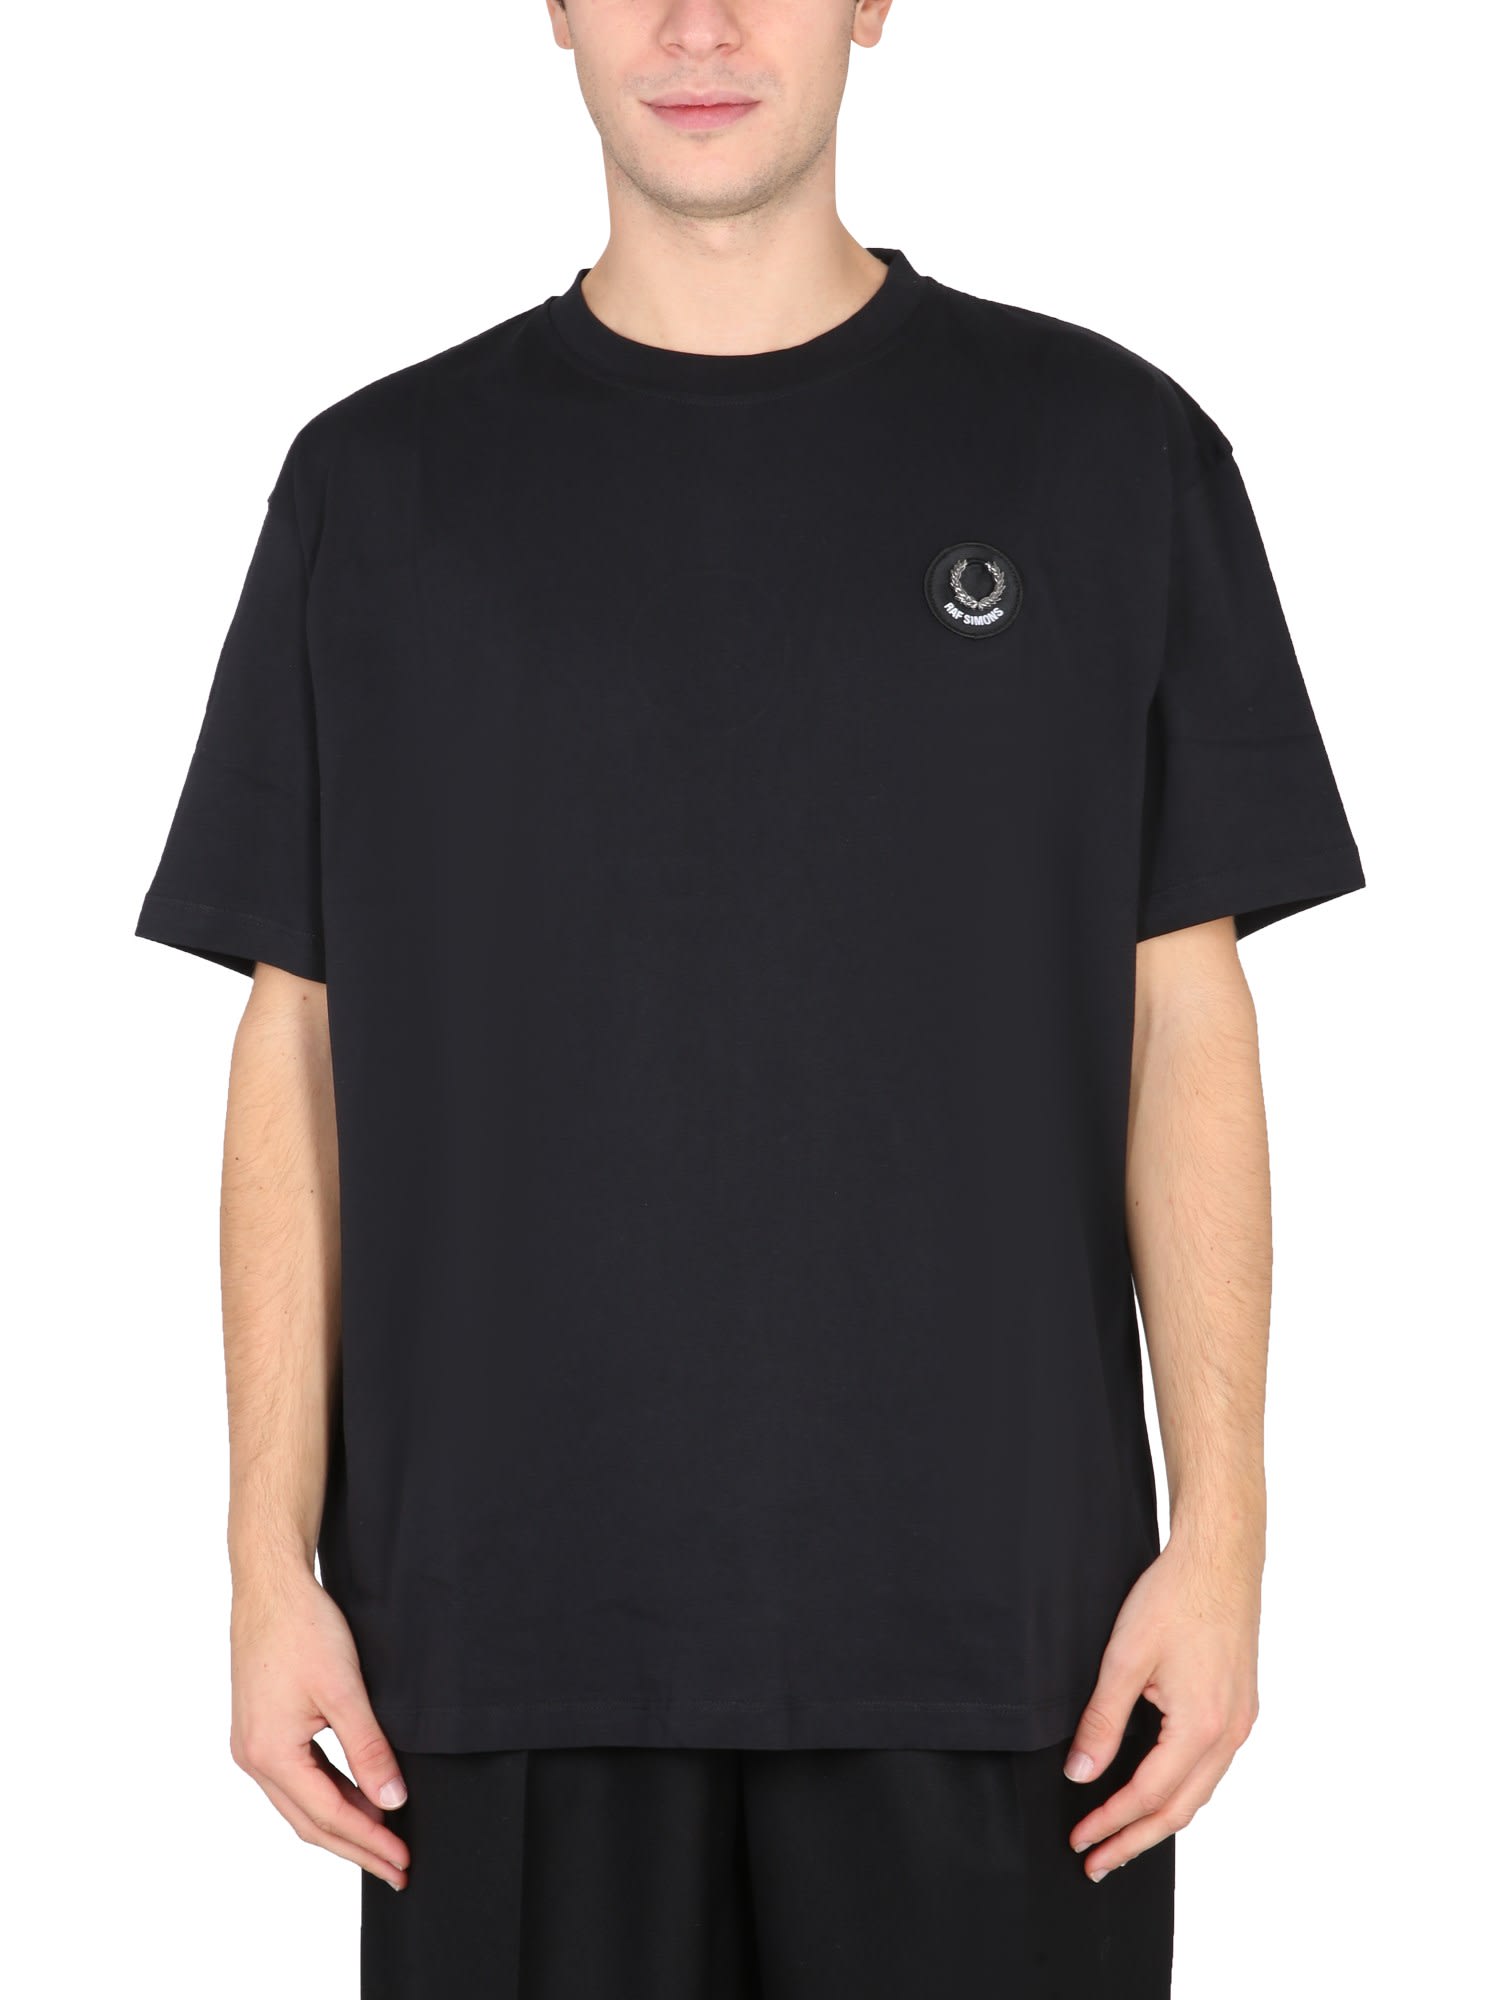 Fred Perry by Raf Simons Oversized Logo T-shirt